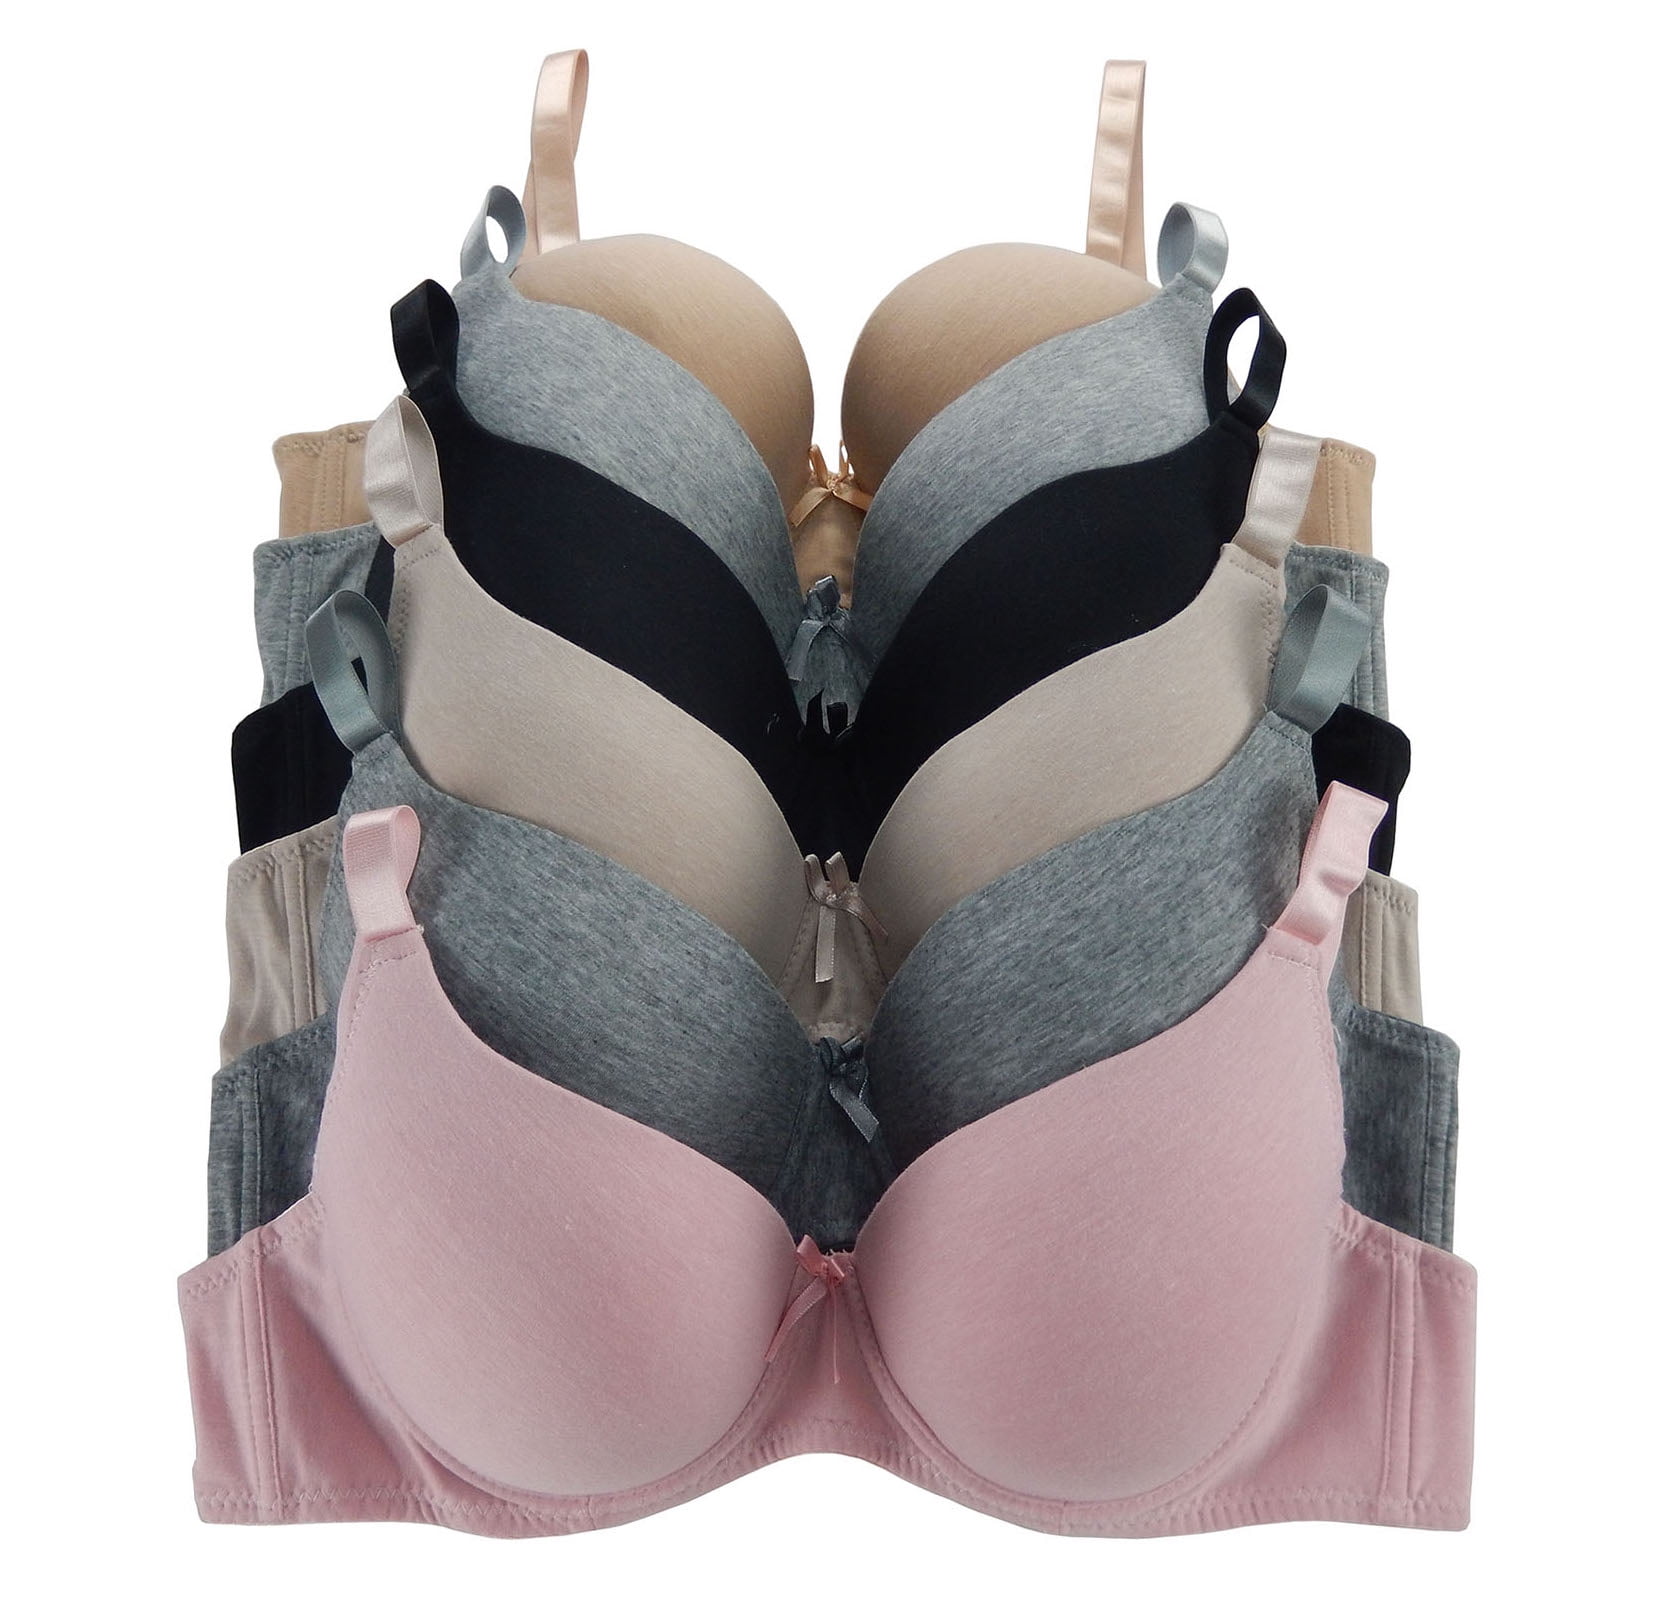 Women Bras 6 pack of Bra B cup C cup D cup DD cup Size 36D (S9284) 